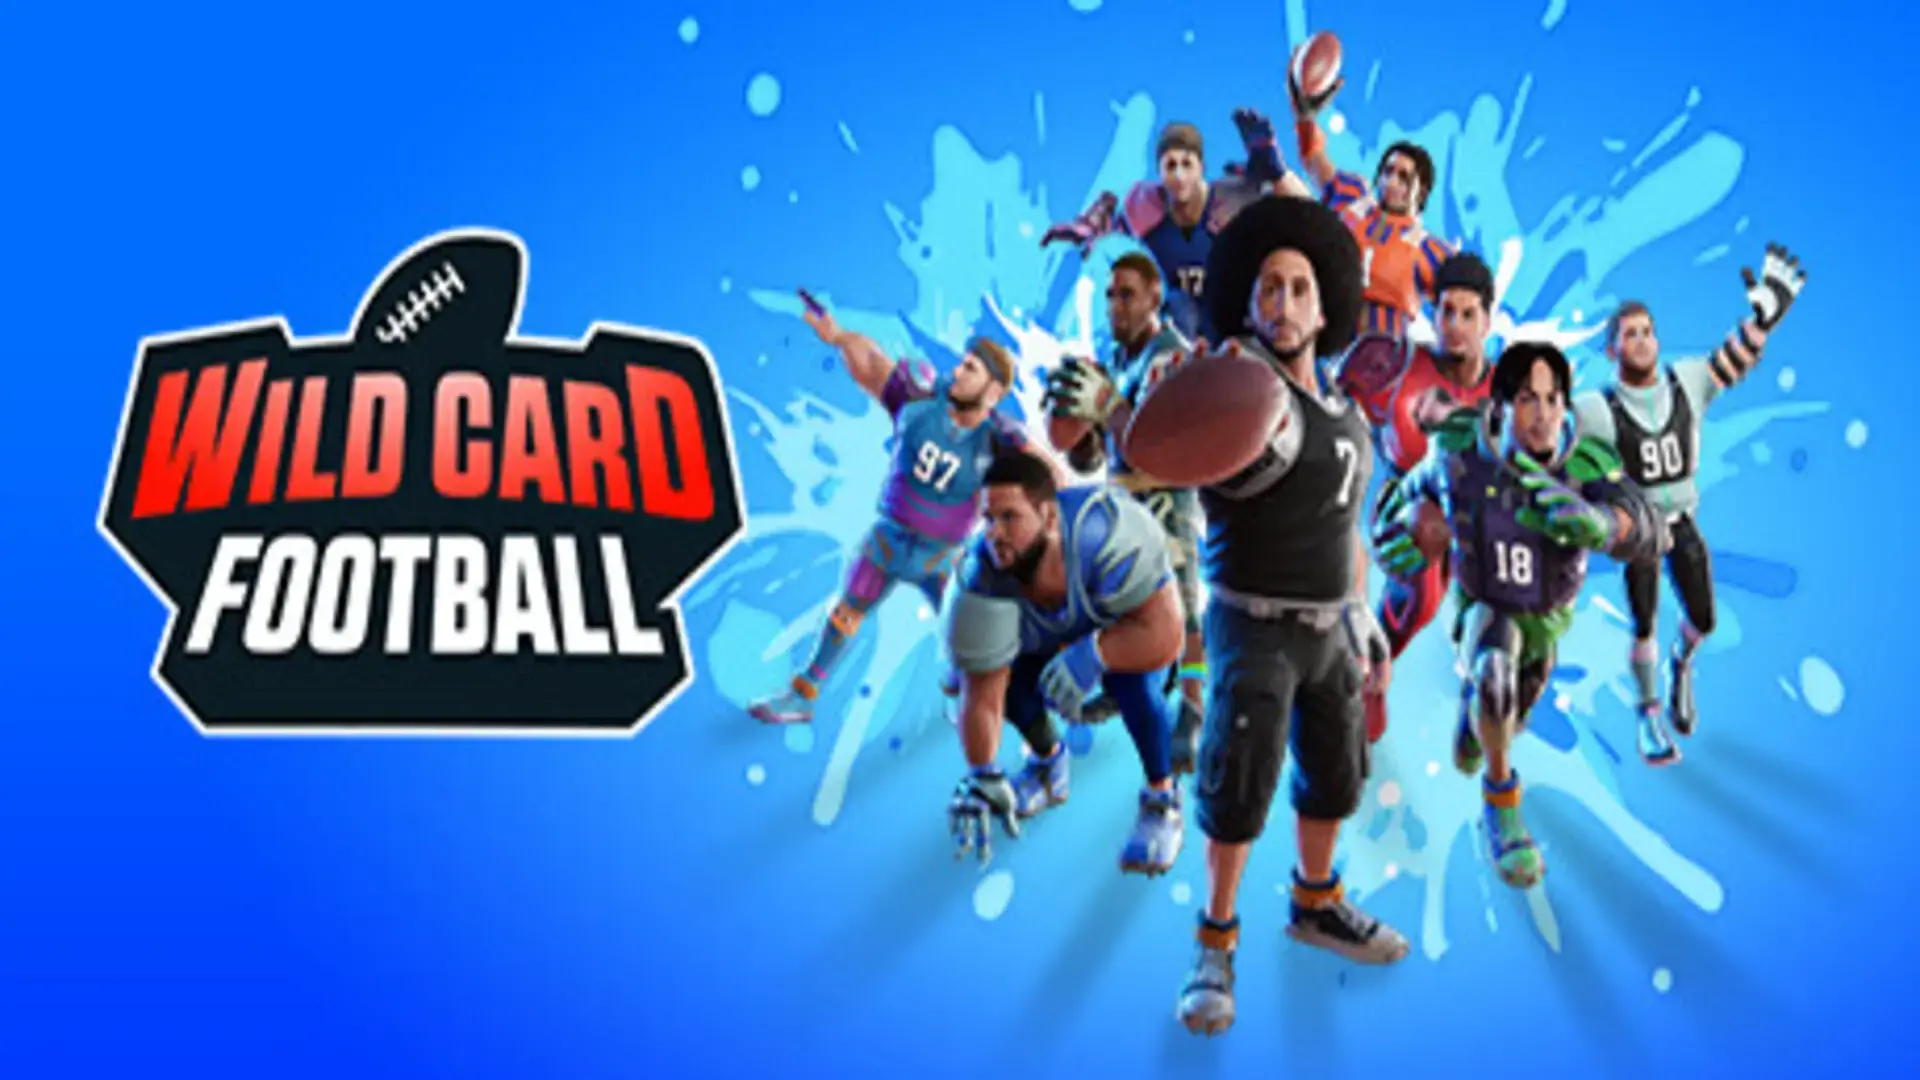 Wild Card Football – Free Download (Build 12119757)